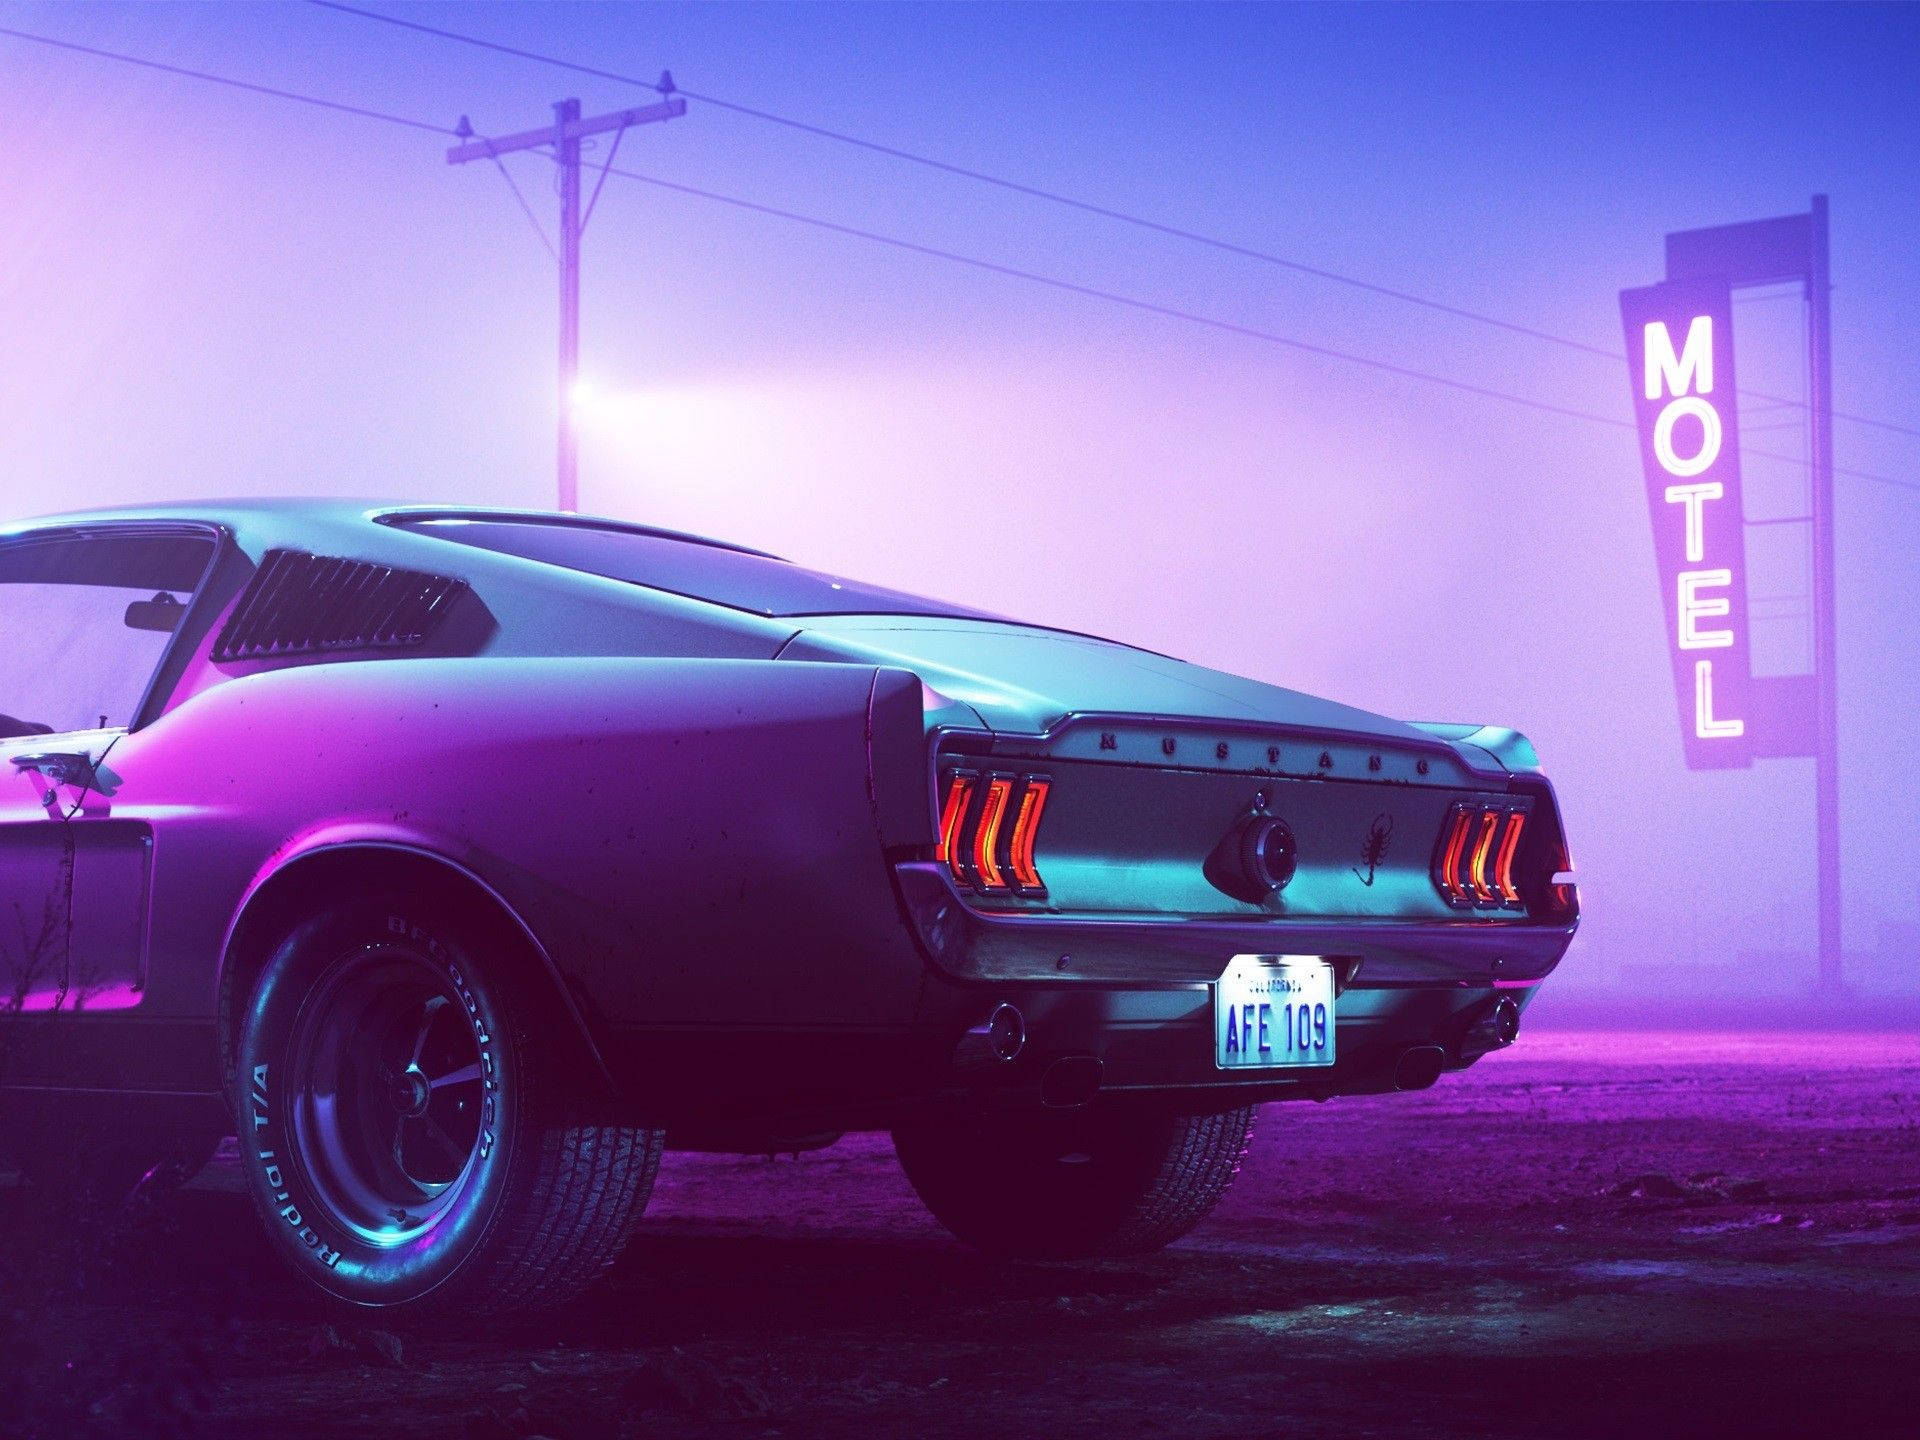 Motel And Car Aesthetic Purple Neon Computer Wallpaper